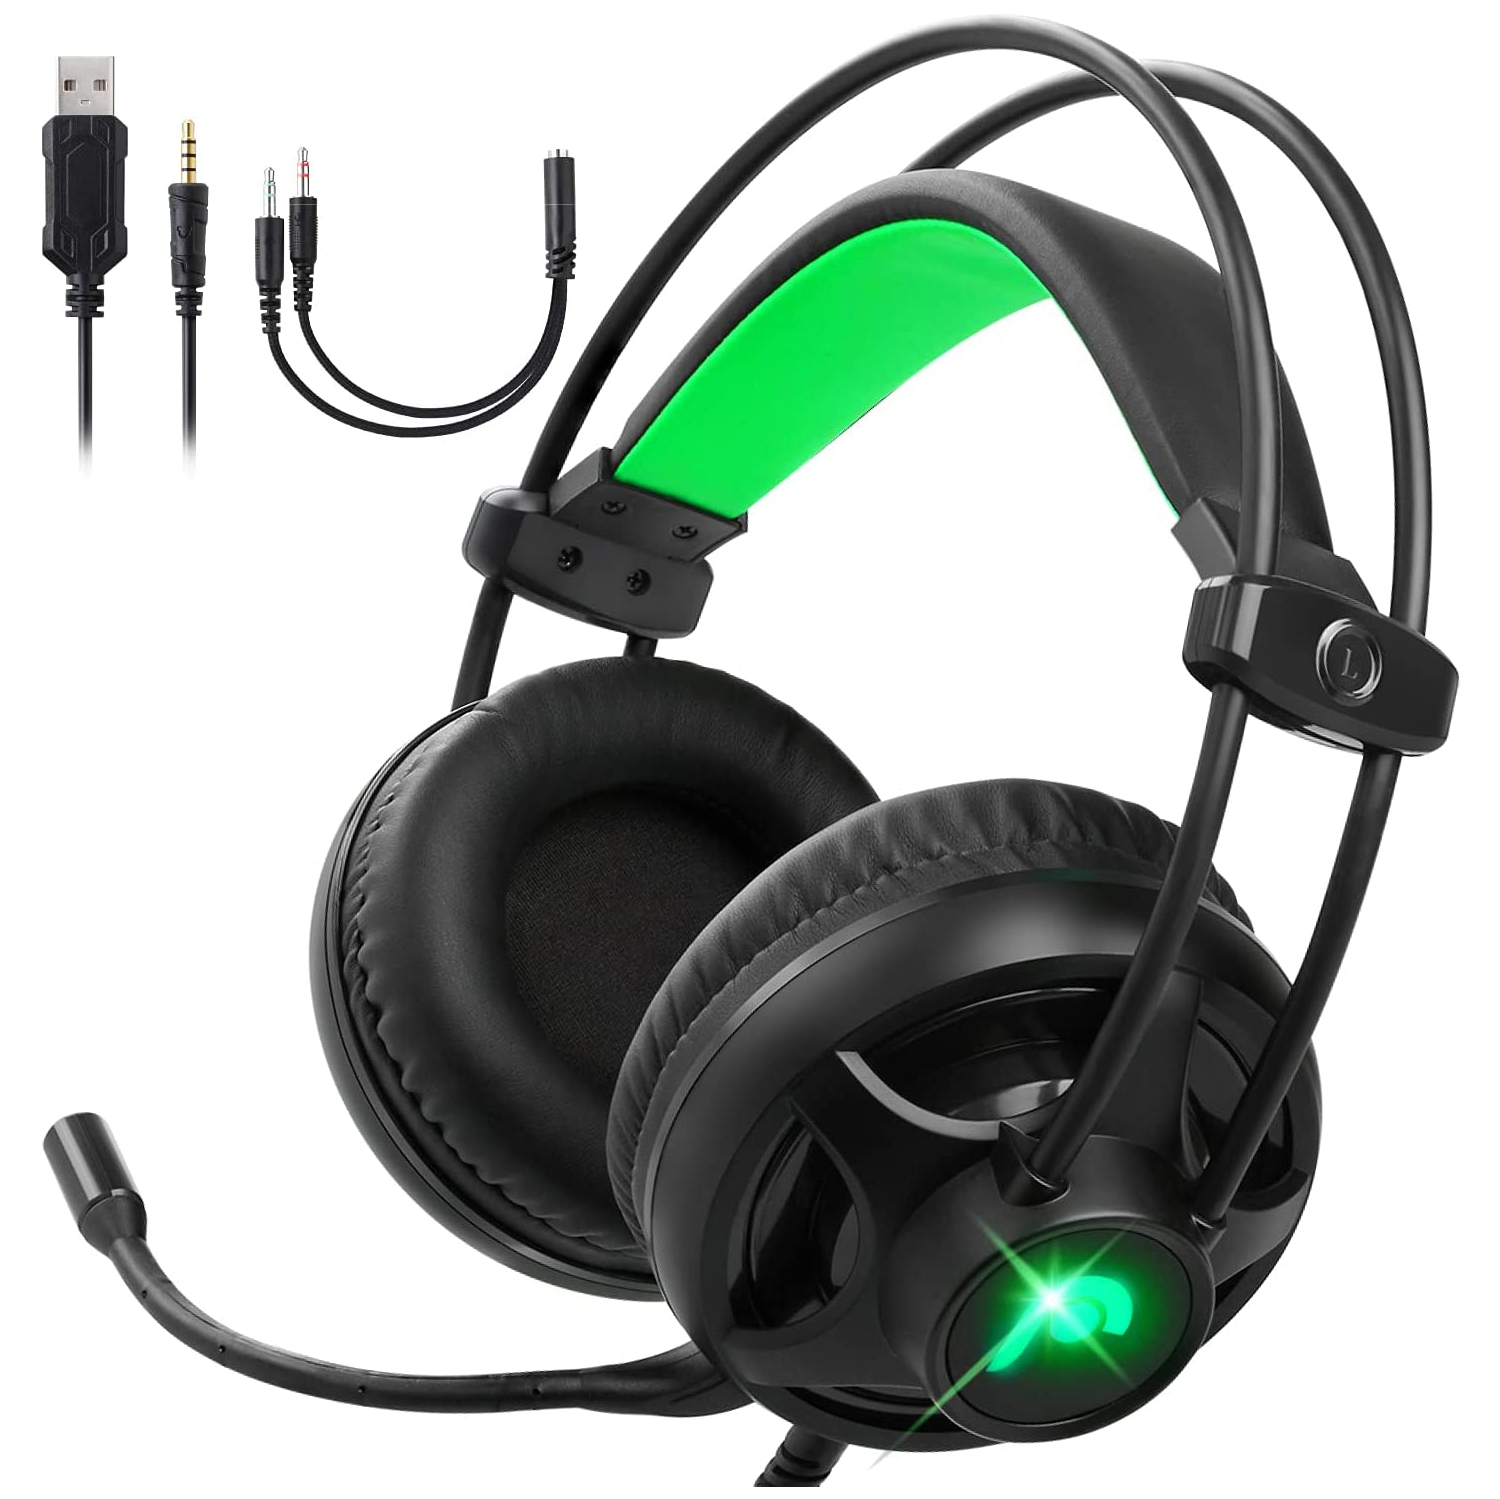 Dolaer Gaming Headset with Microphone & Volume Control, 3D Surround Strong Bass Over Ear Headphone with Ergonomic Headband Compatible with Xbox PS4 PS5 Nintendo Switch PC Laptop De